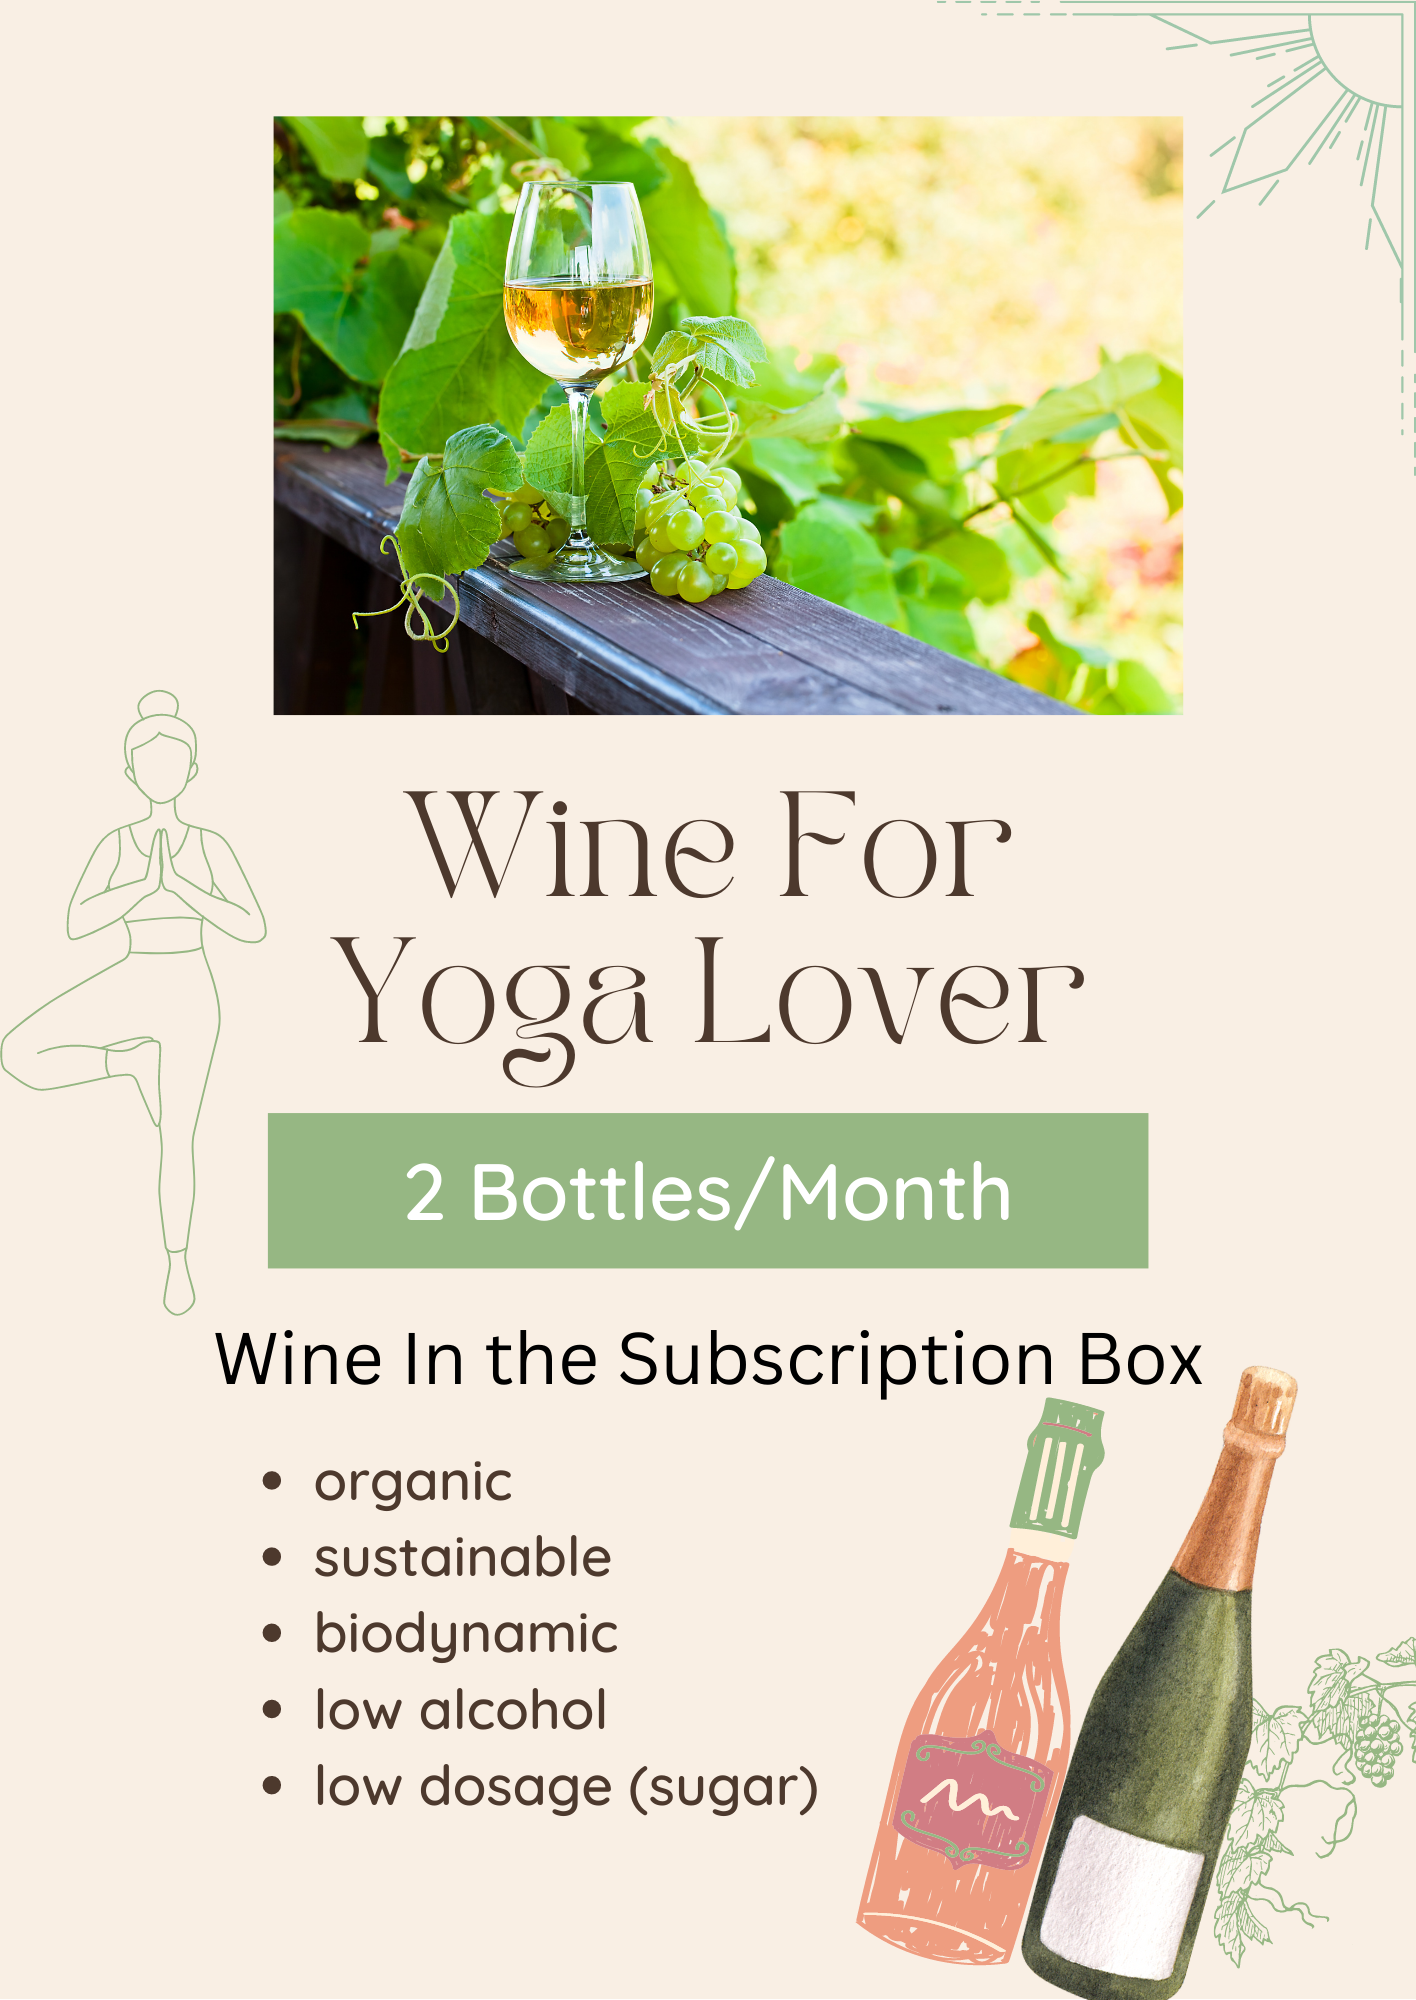 free wine tasting
Wine subscription boxes give wine lovers an opportunity to develop their palate, find new favourites and pair their drinks like a true connoisseur. Foxie Club offers exceptional bottles from unique winemakers and regions all over the wor